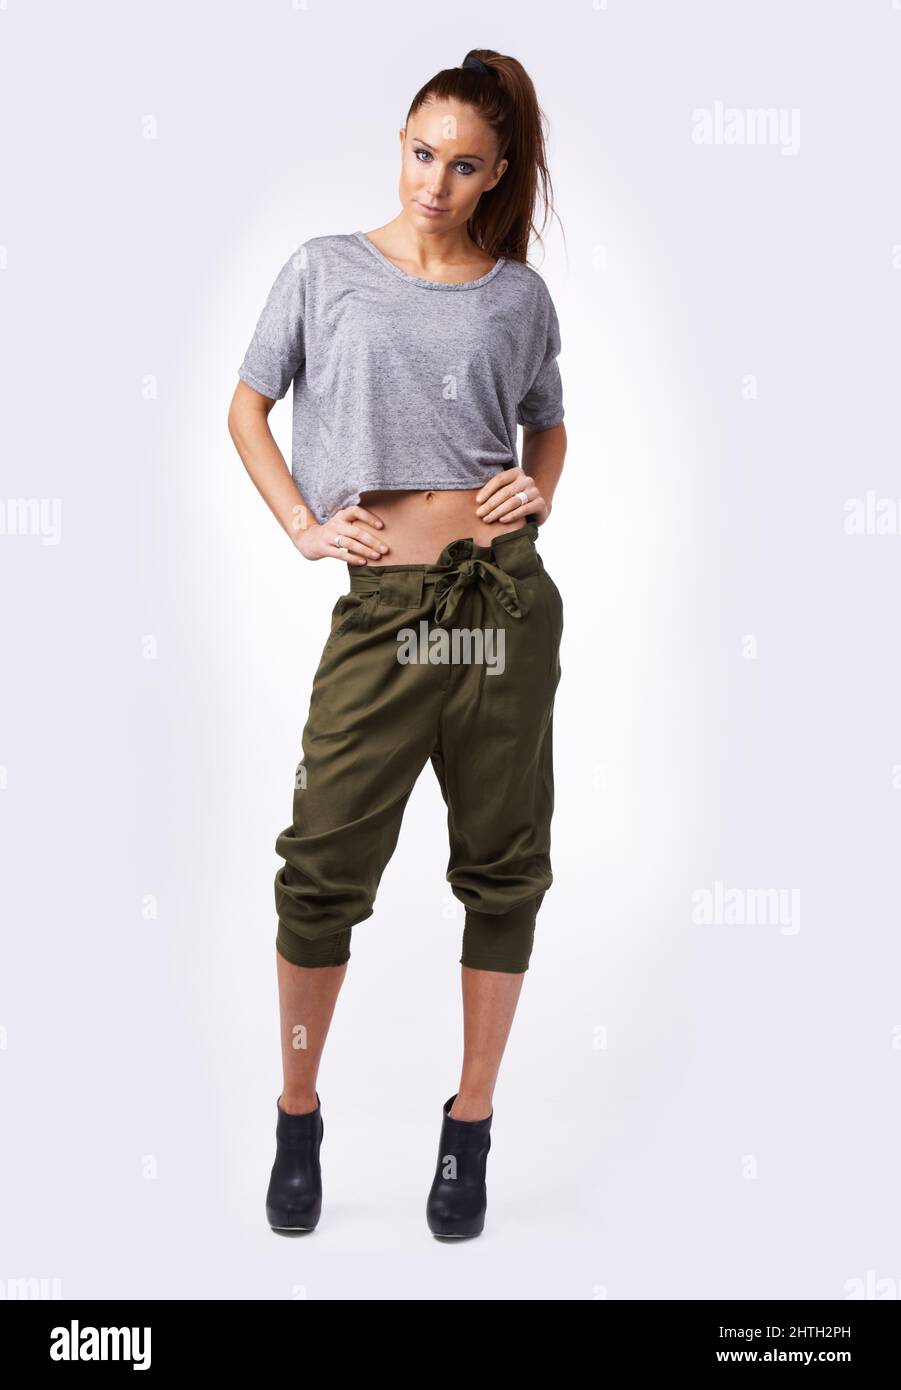 Awesome outfit day. Full-length portrait of a beautiful young woman posing in casual wear. Stock Photo